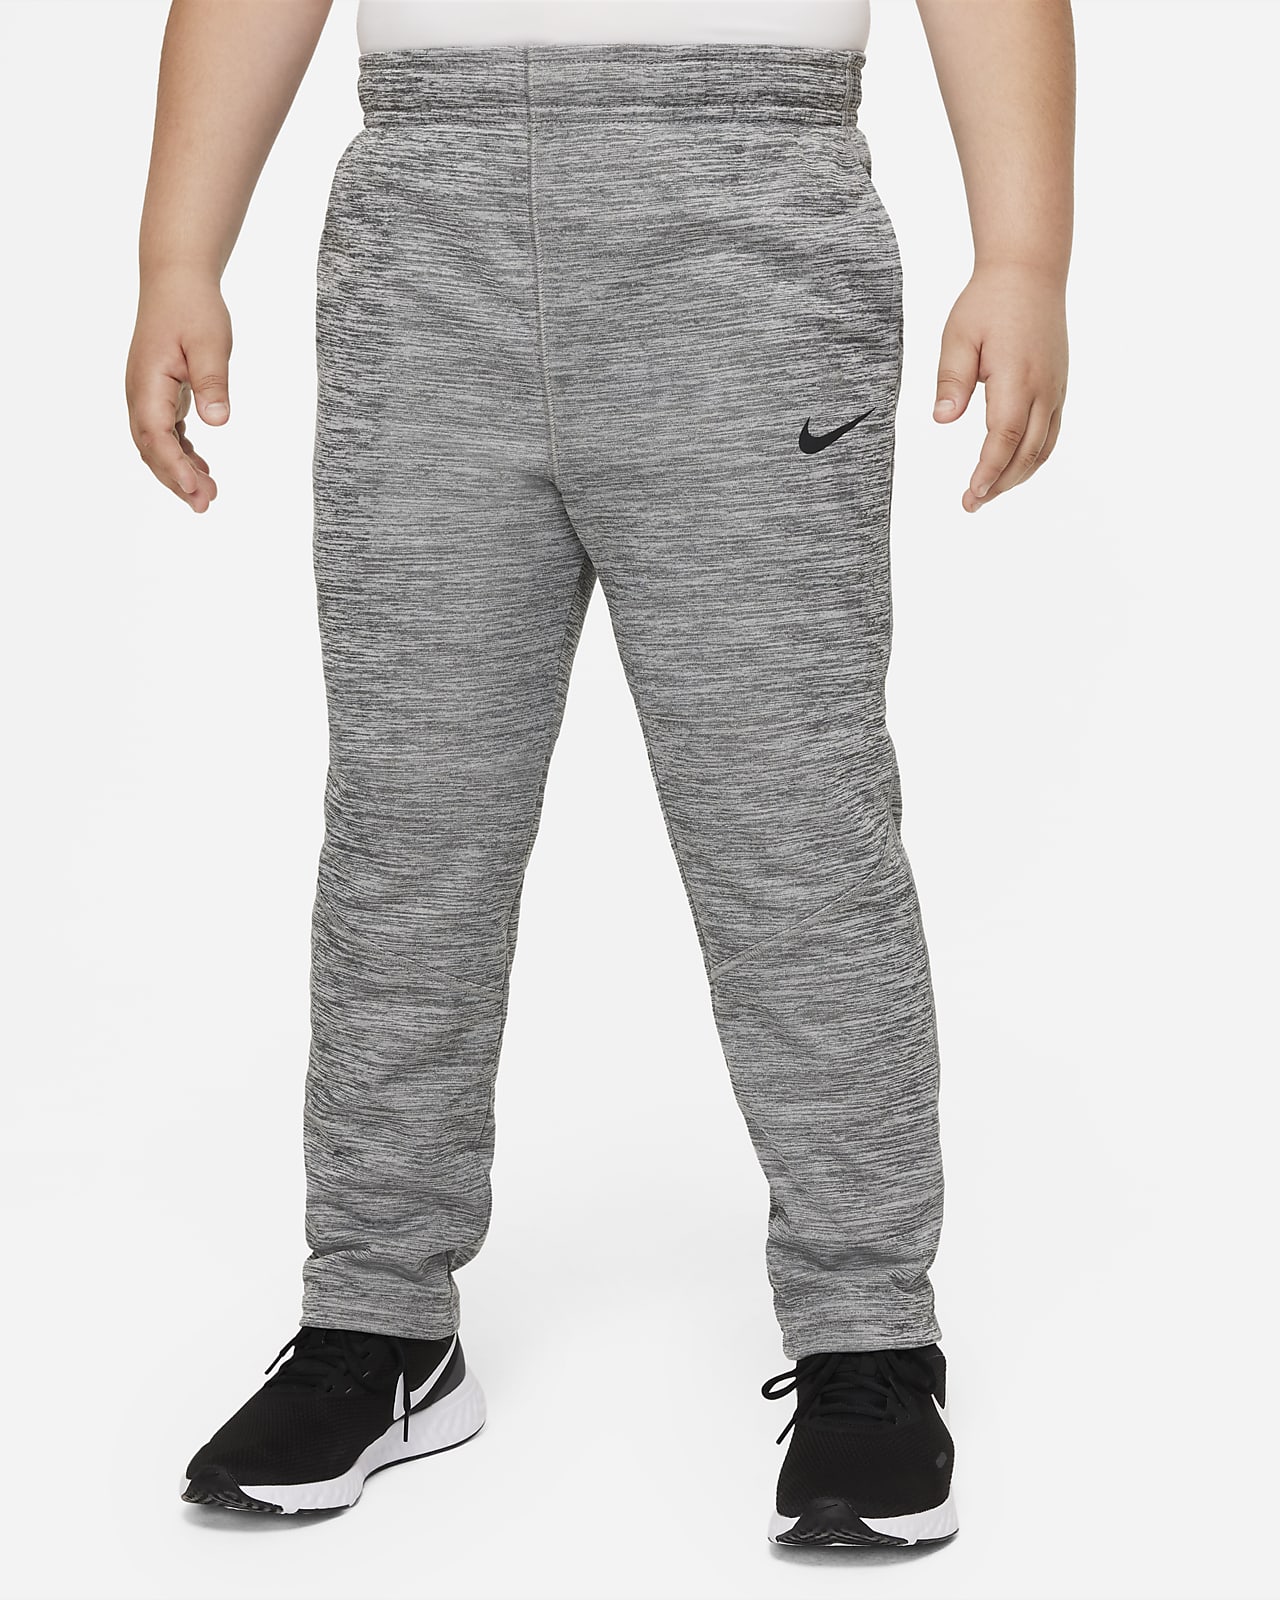 End table Aviation brink Nike Therma-FIT Big Kids' (Boys') Open-Hem Training Pants (Extended Size).  Nike.com